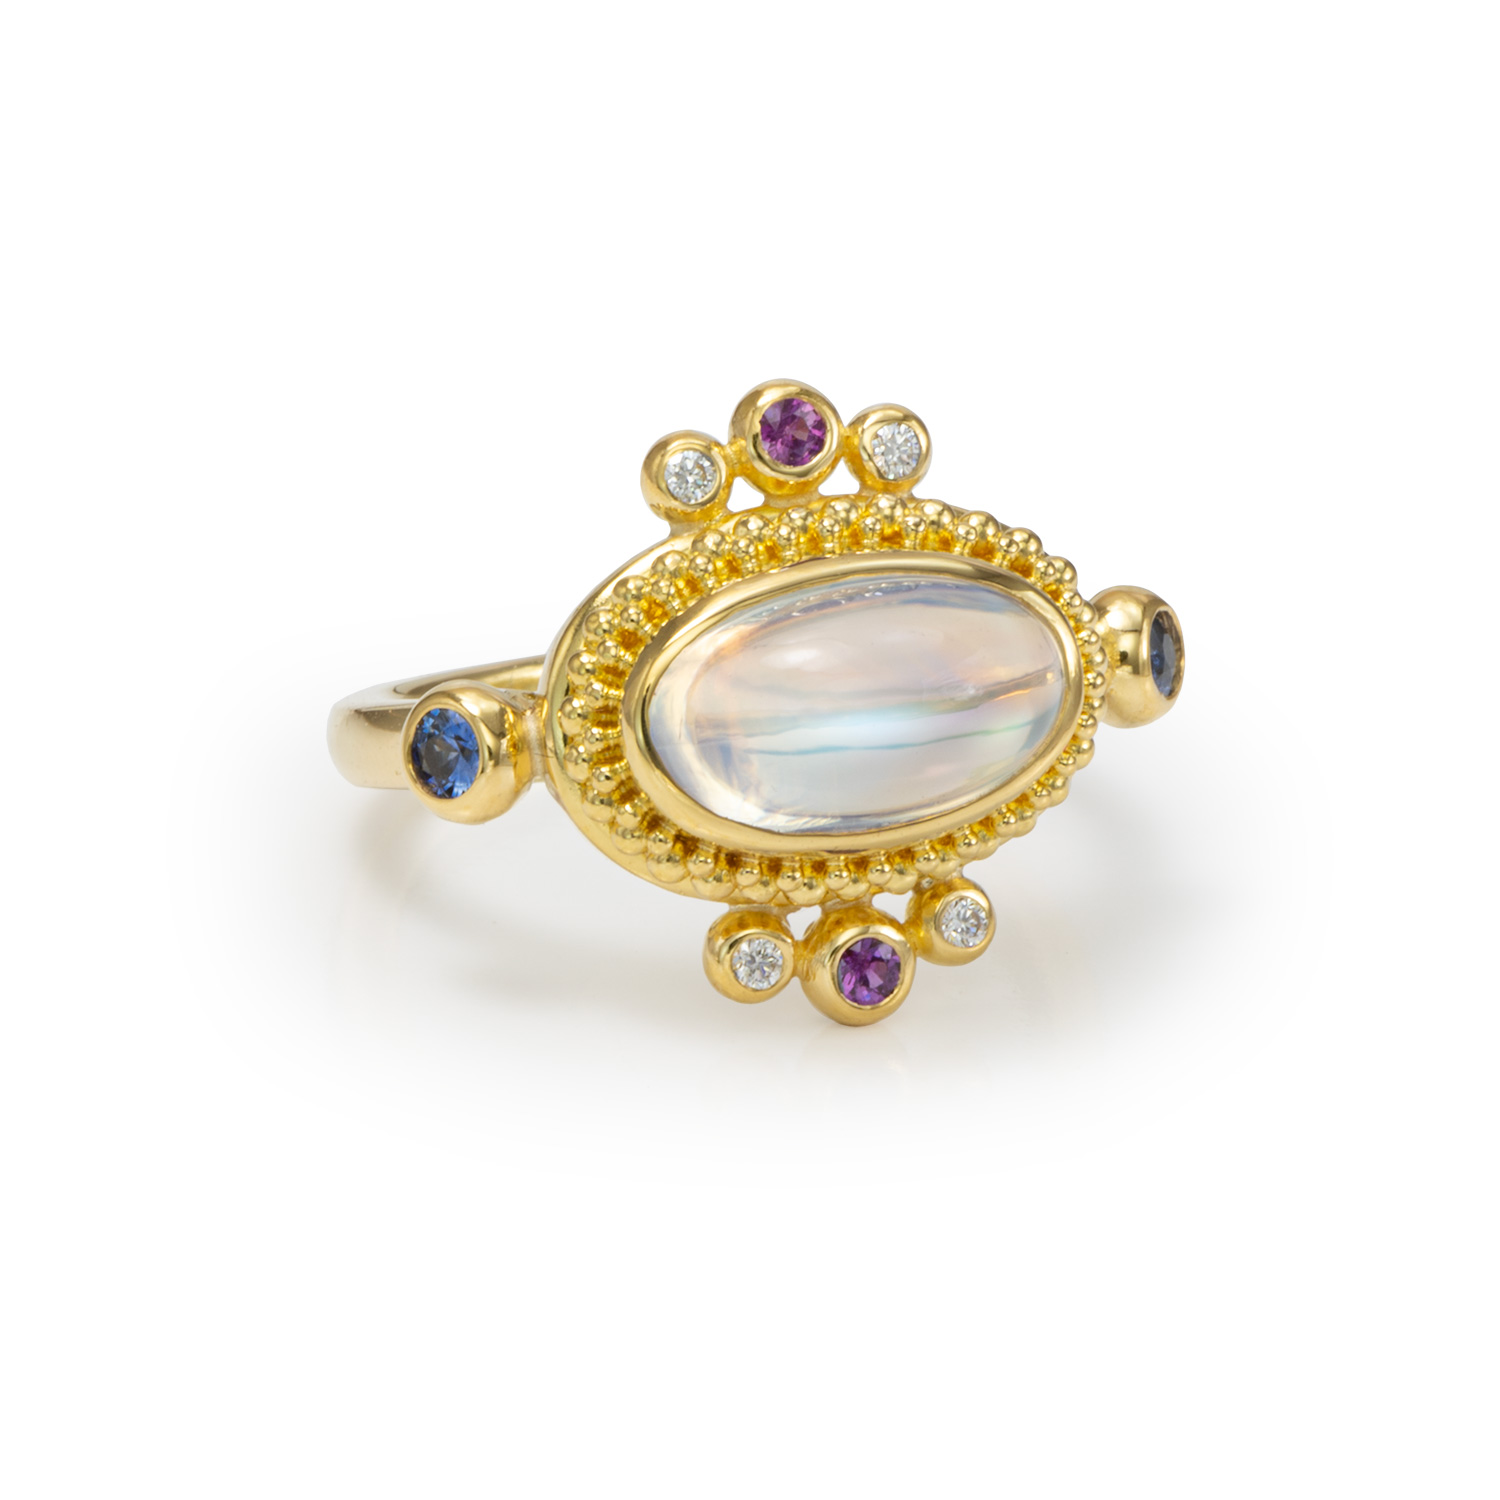 22kt gold granulation ring with moonstone